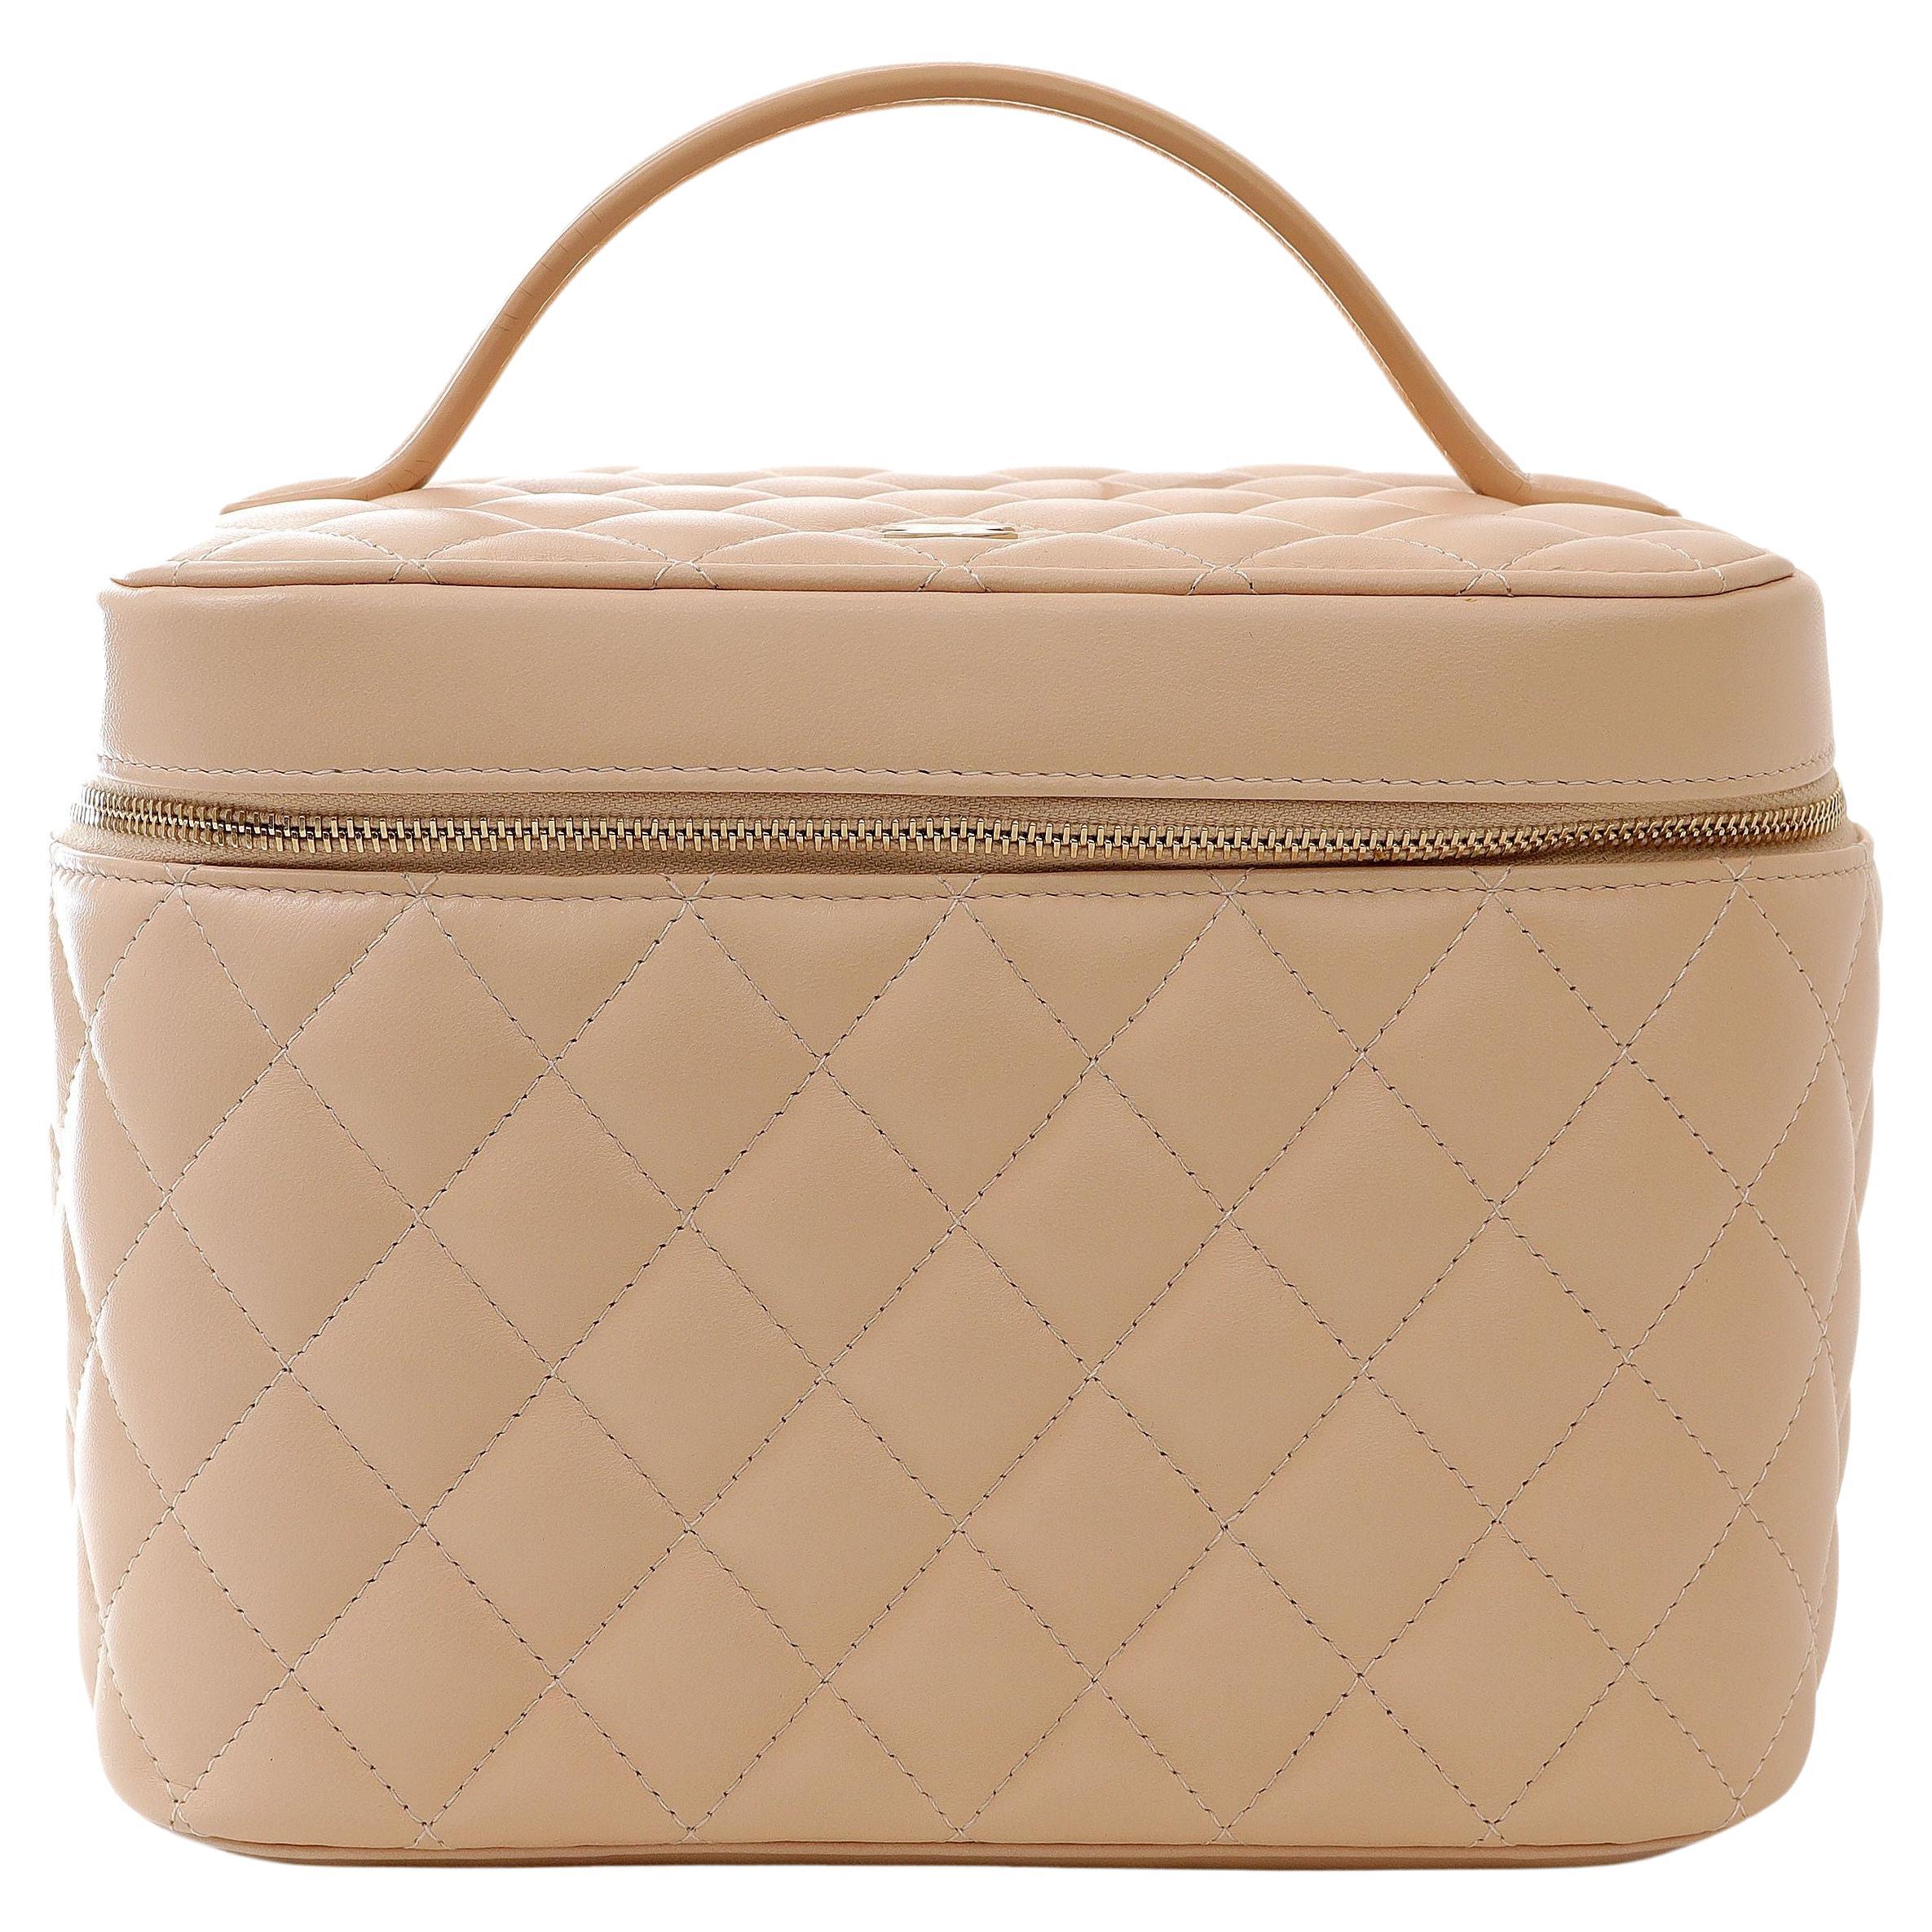 CHANEL Lambskin Quilted Polly Pocket East West Top Vanity With